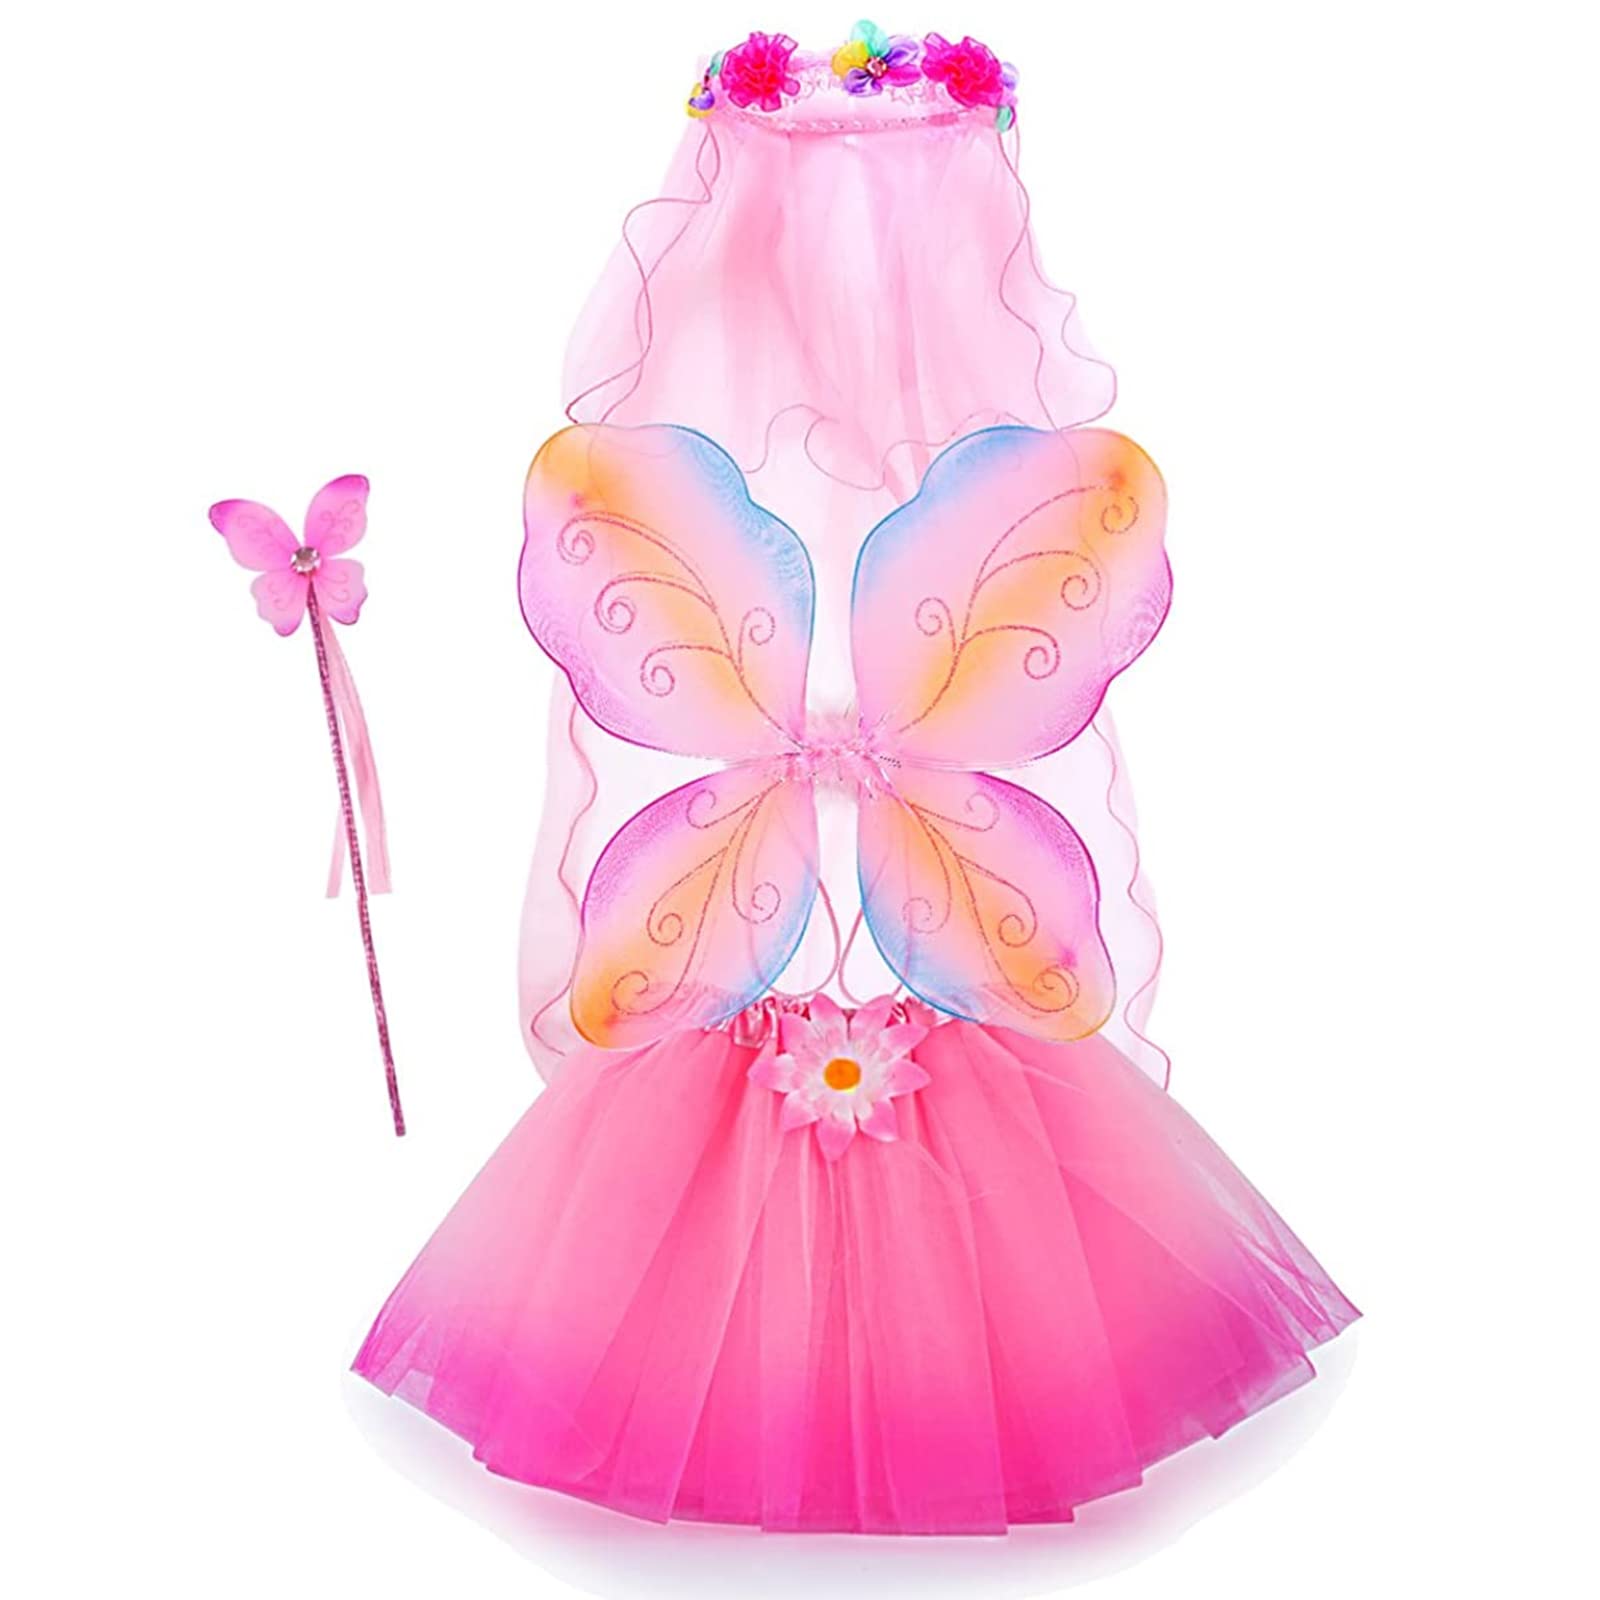 Fairy Costume, Sinuo Costume Set With Wings,Tutu,Wand and Veil Princess Set Fit Girls Age 3-8(Pink)